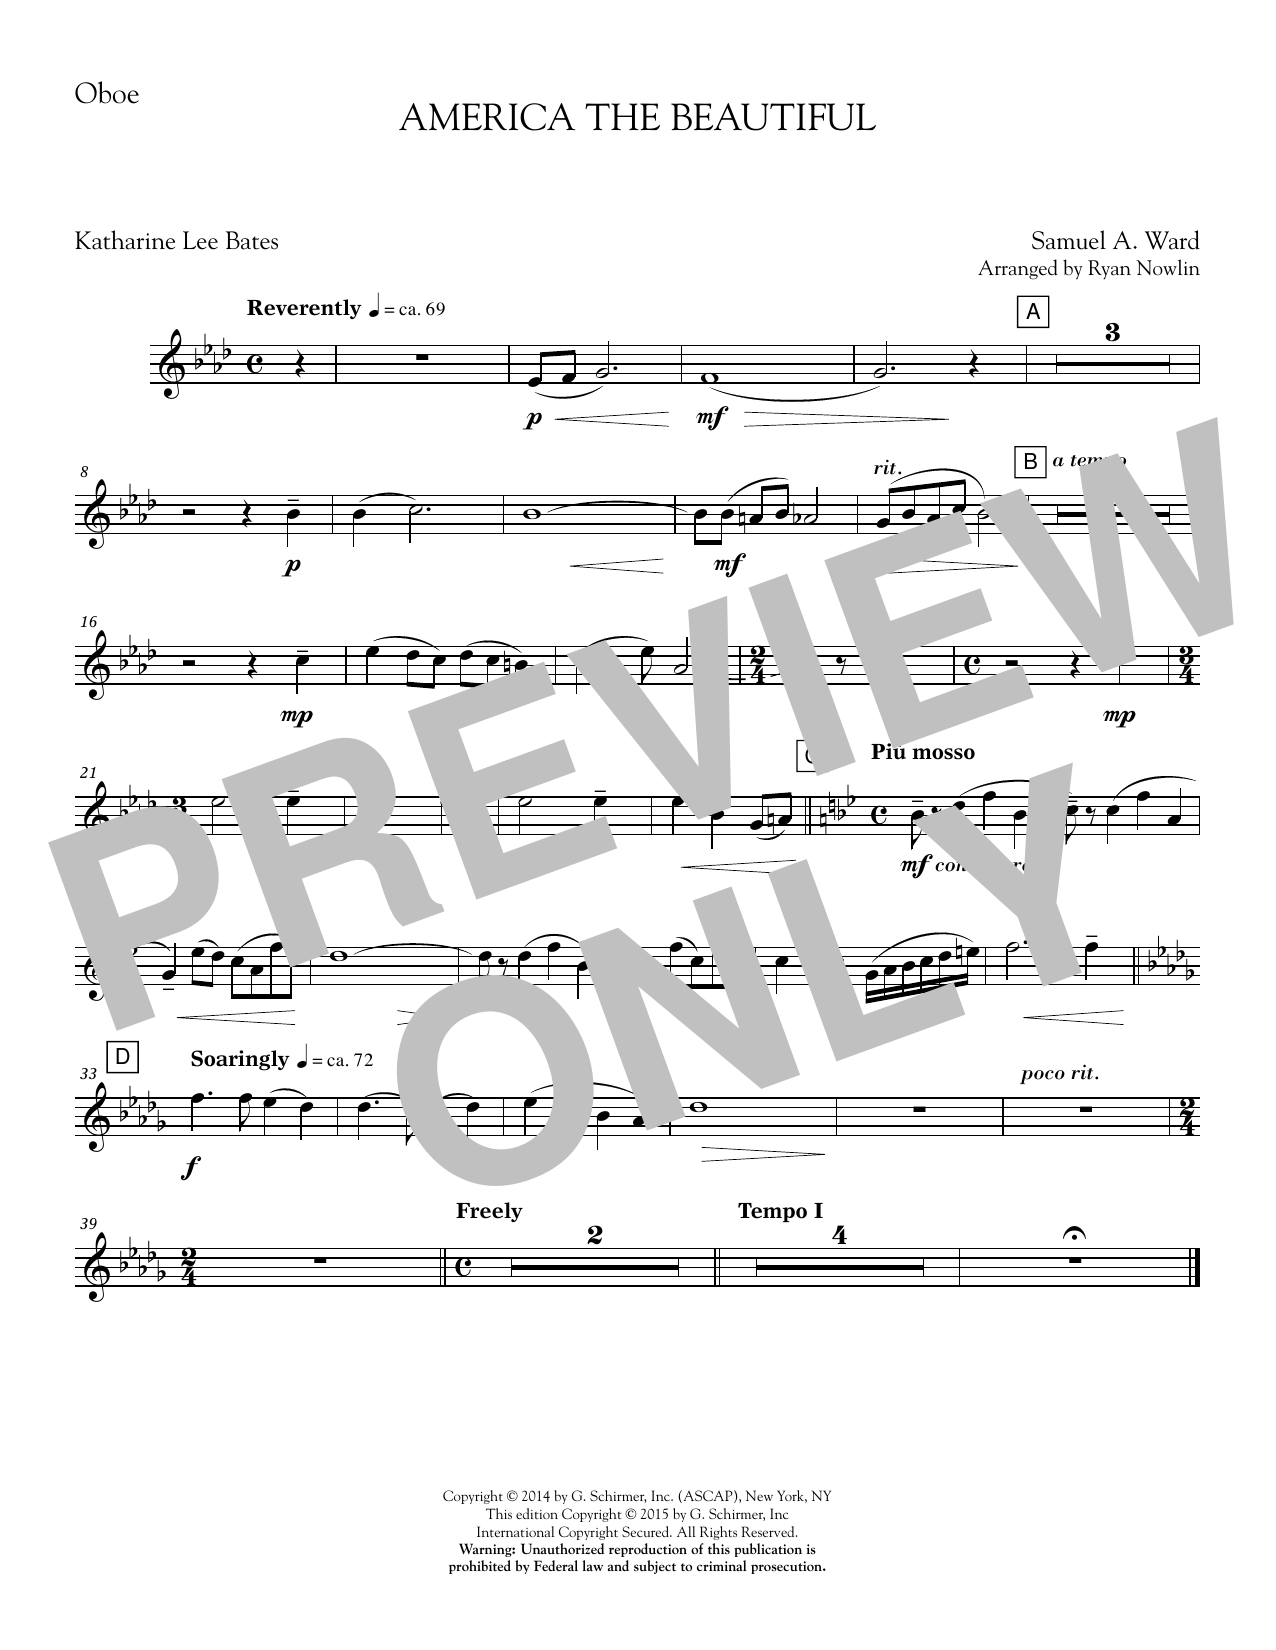 Ryan Nowlin America, the Beautiful - Oboe sheet music notes and chords. Download Printable PDF.